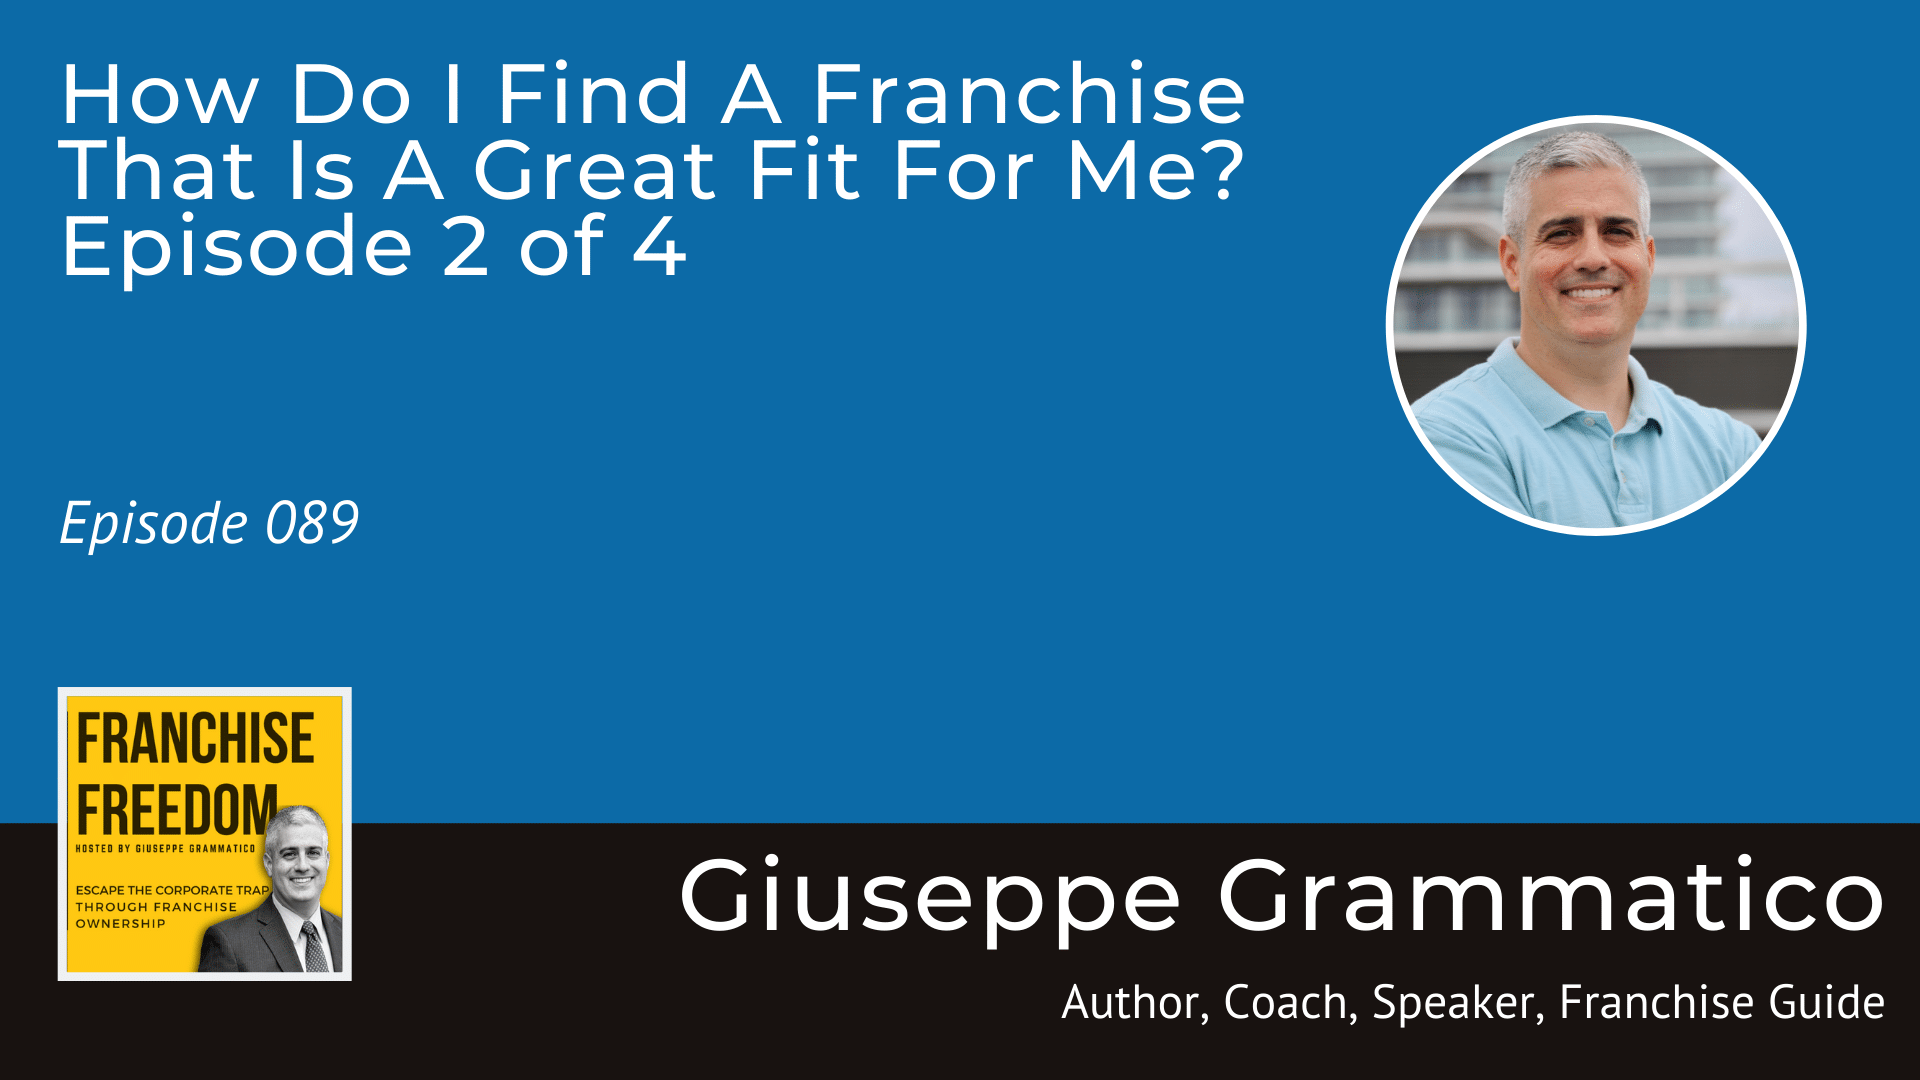 How Do I Find A Franchise That Is A Great Fit For Me? Episode 2 of 4